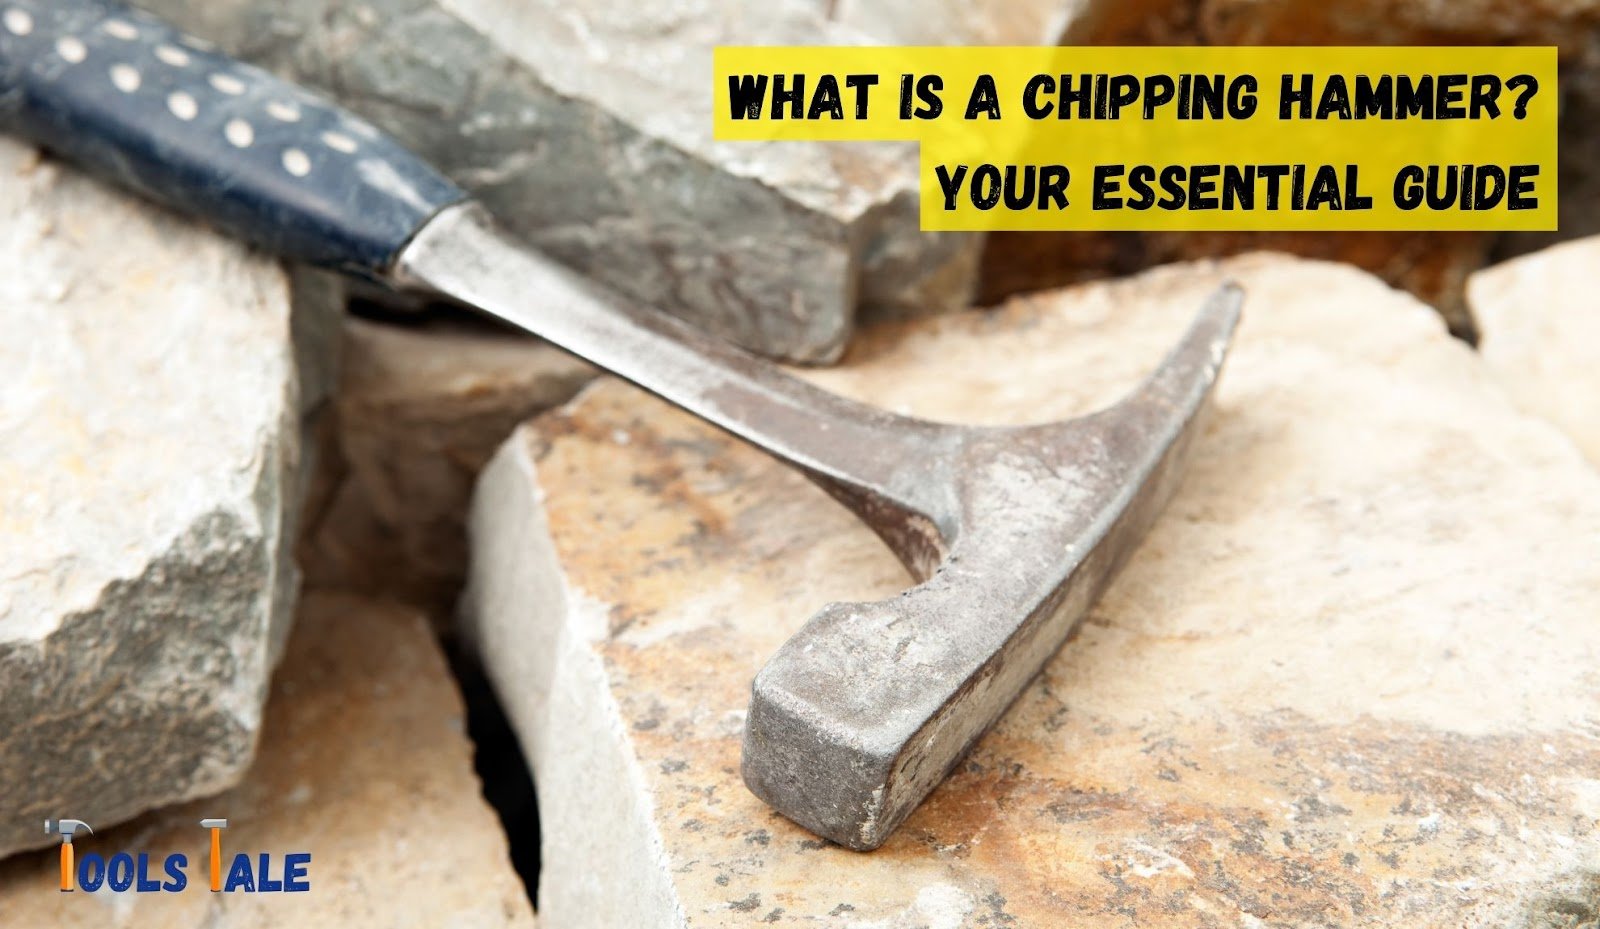 What is a chipping hammer